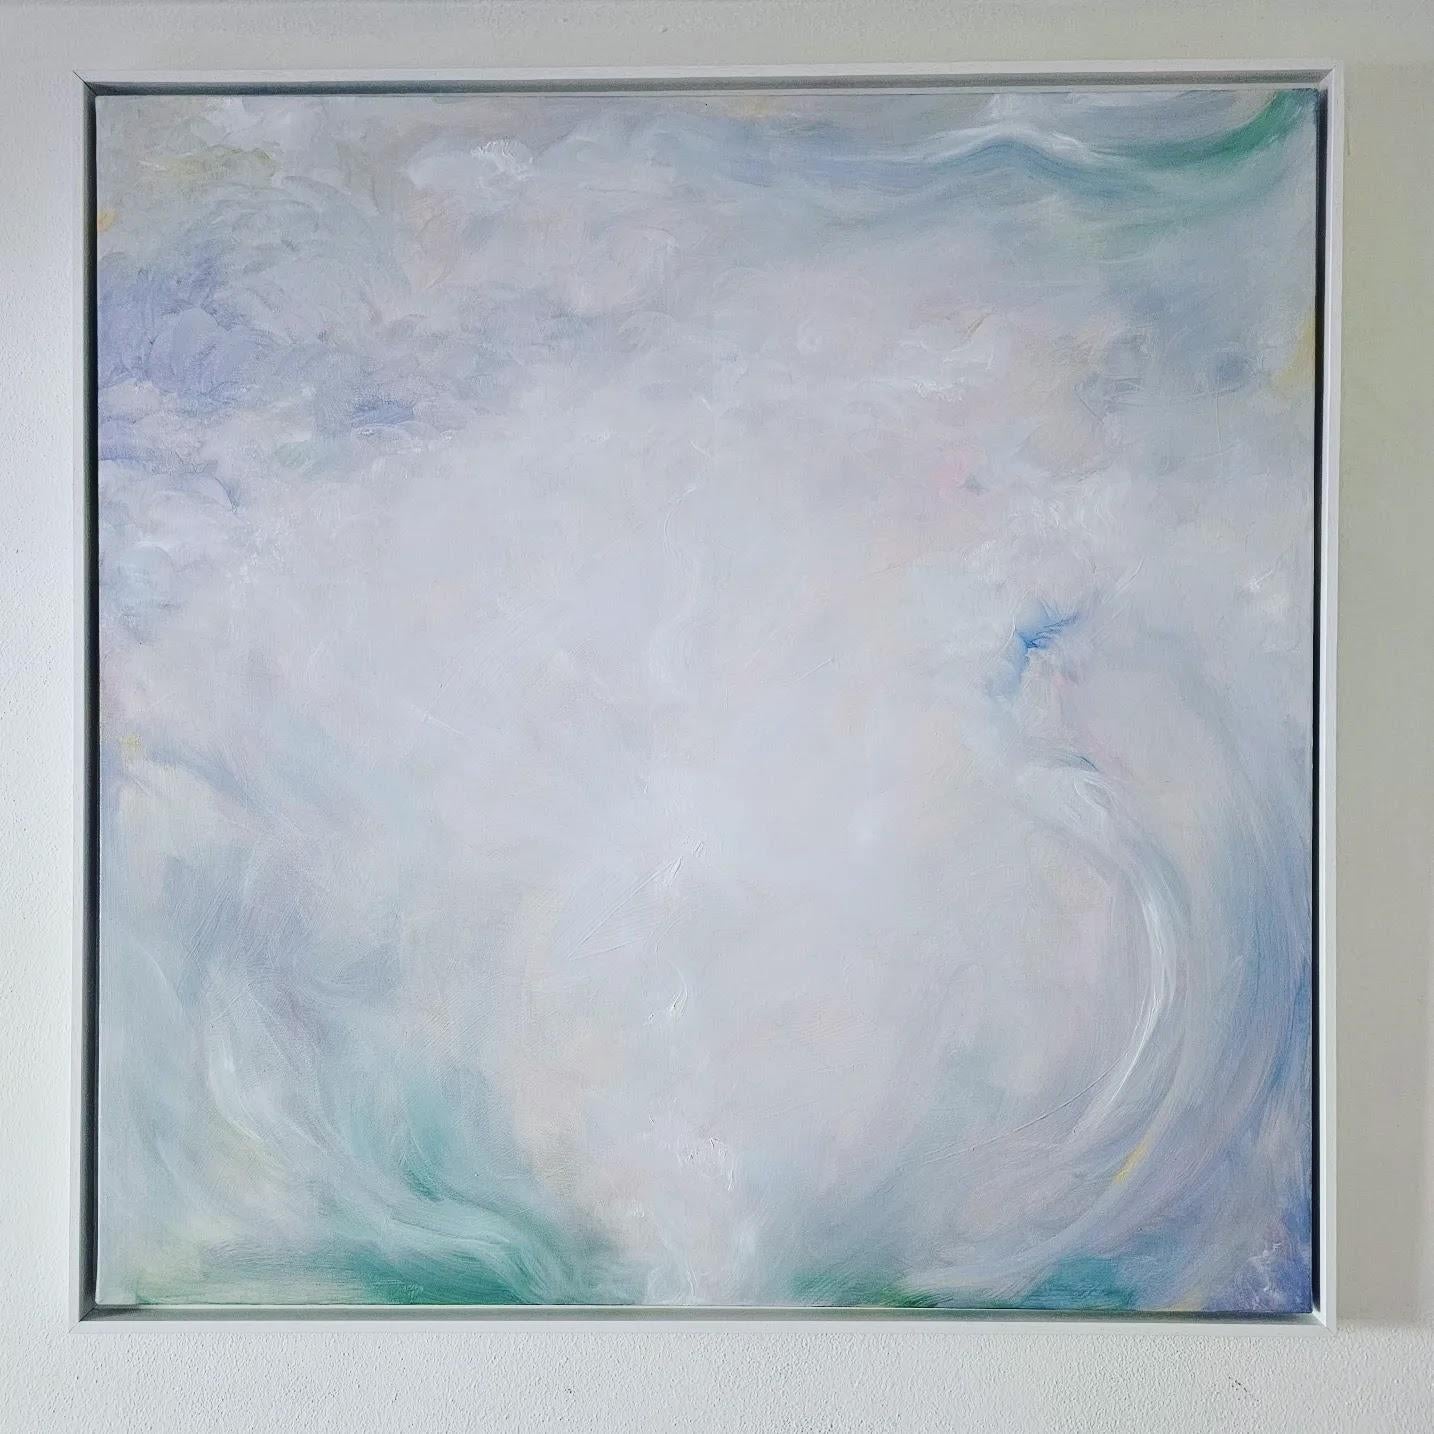 The Awakening - Soft, subtle, large abstract painting - Abstract Expressionist Painting by Jennifer L. Baker